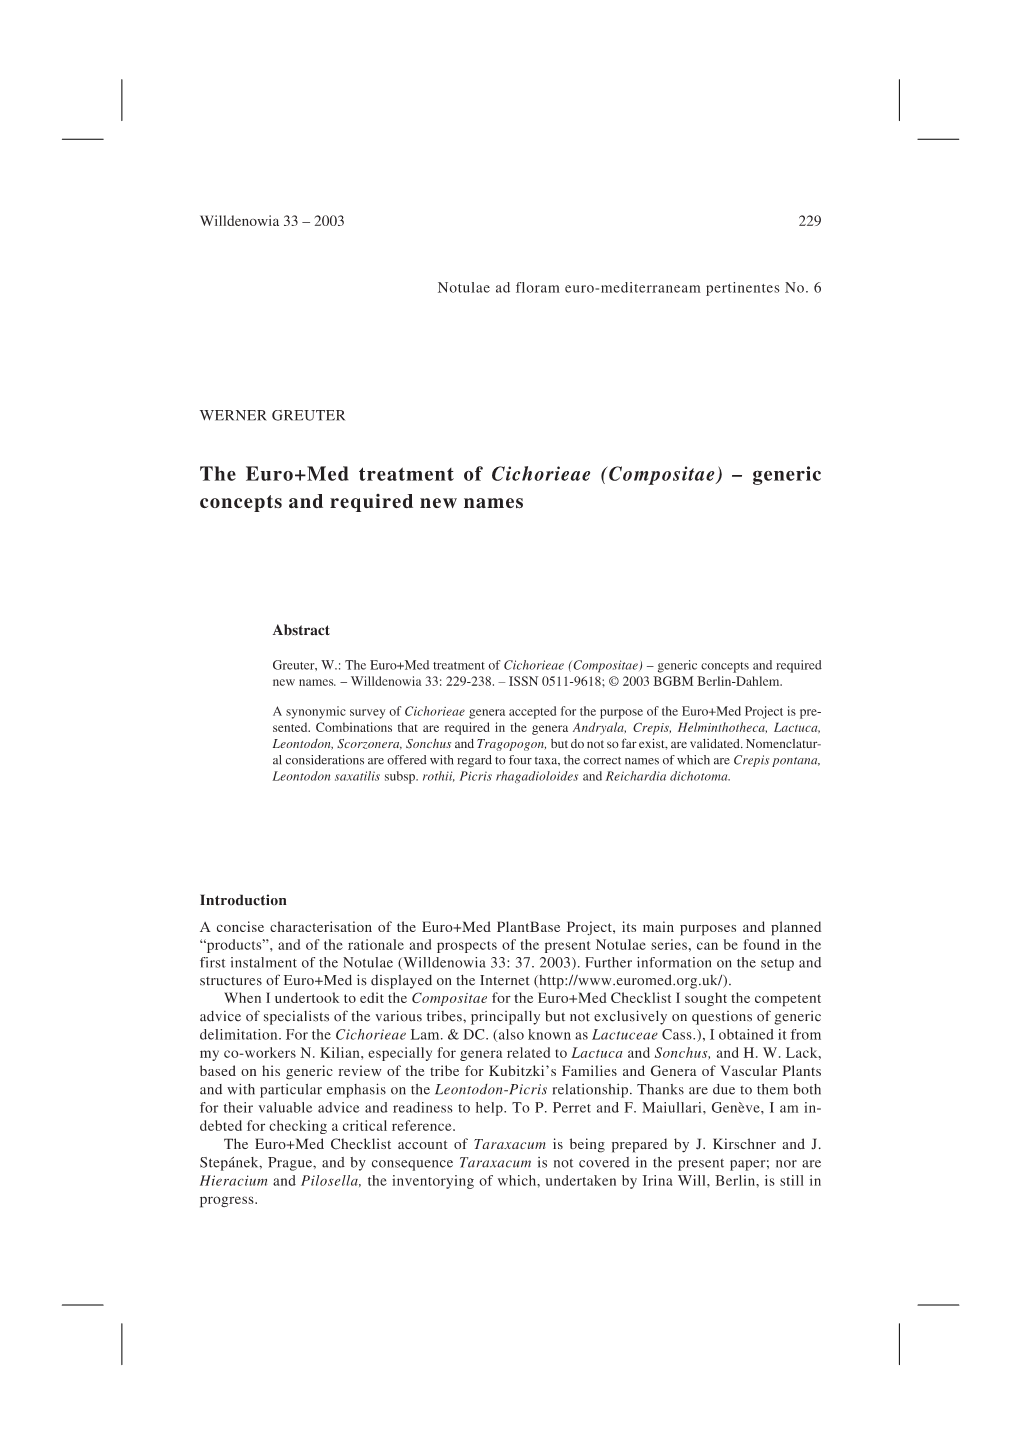 The Euro+Med Treatment of Cichorieae (Compositae) – Generic Concepts and Required New Names